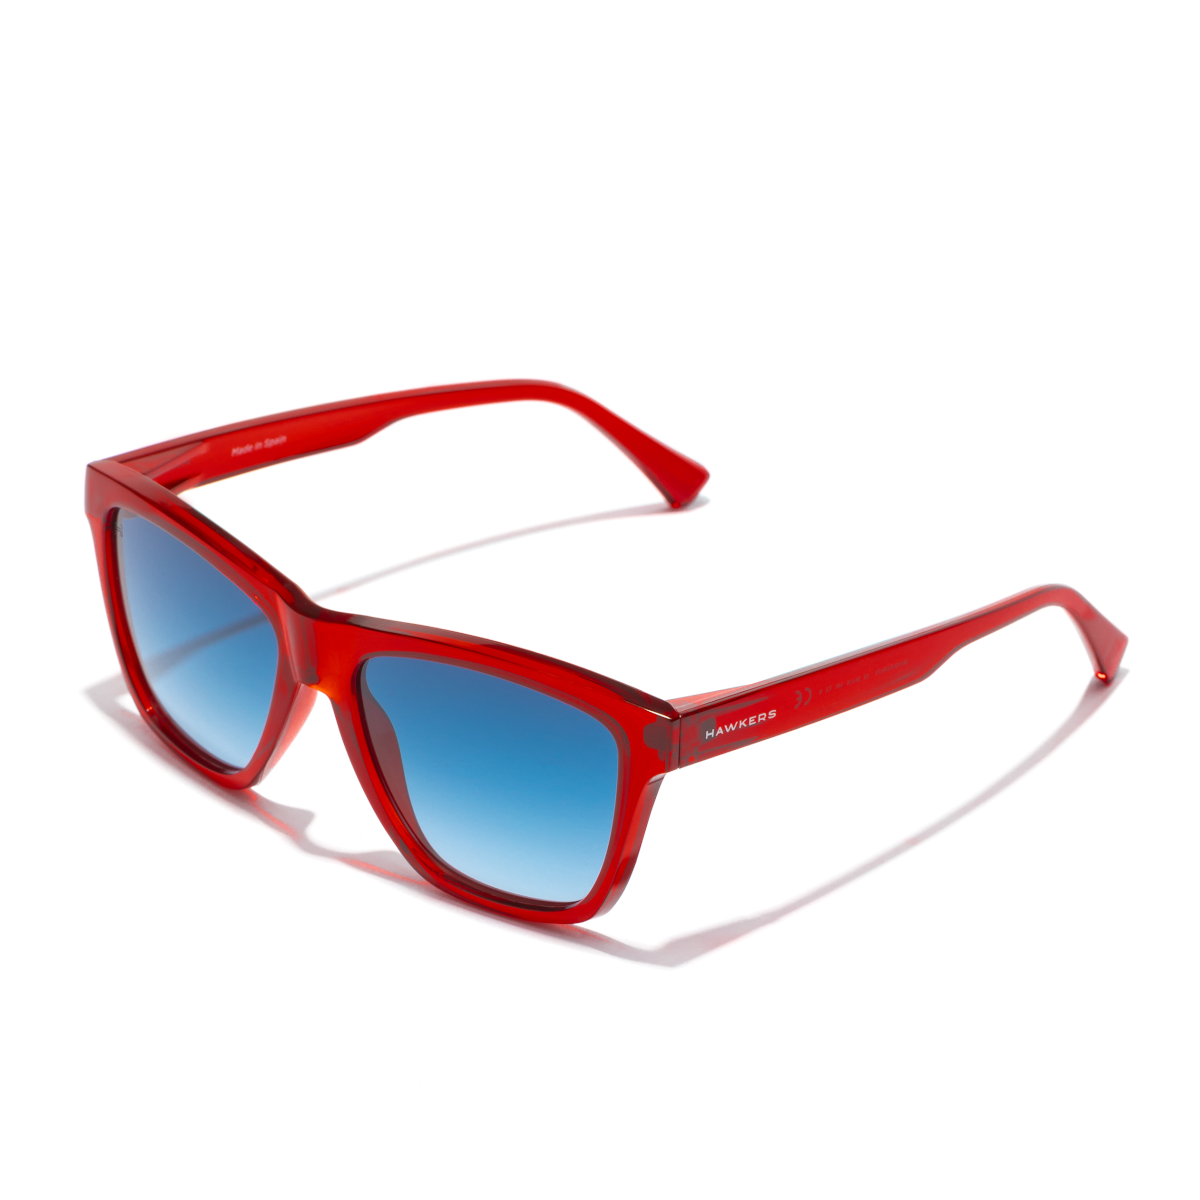 One Ls Raw - Red Transparent Blue